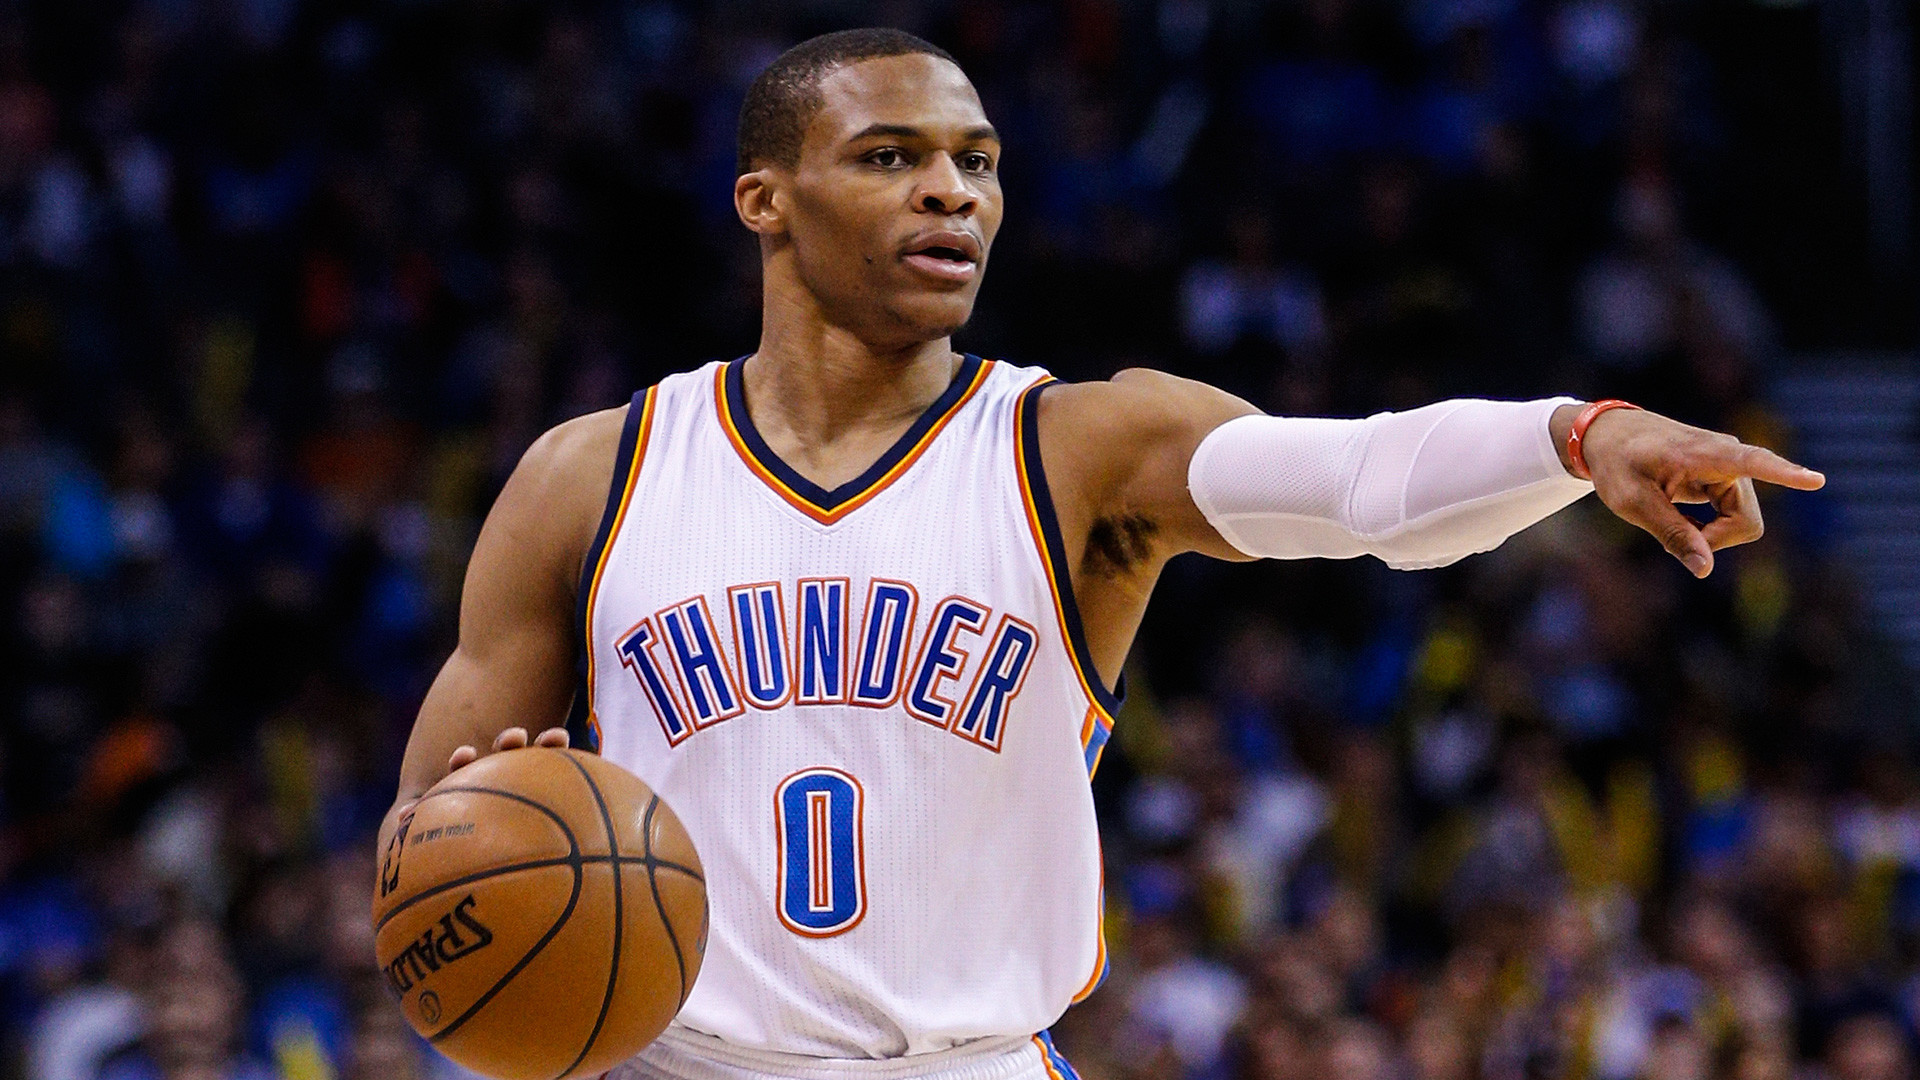 1920x1080 WATCH: New Russell Westbrook Commercial Appears to Take Jab at Kevin Durant